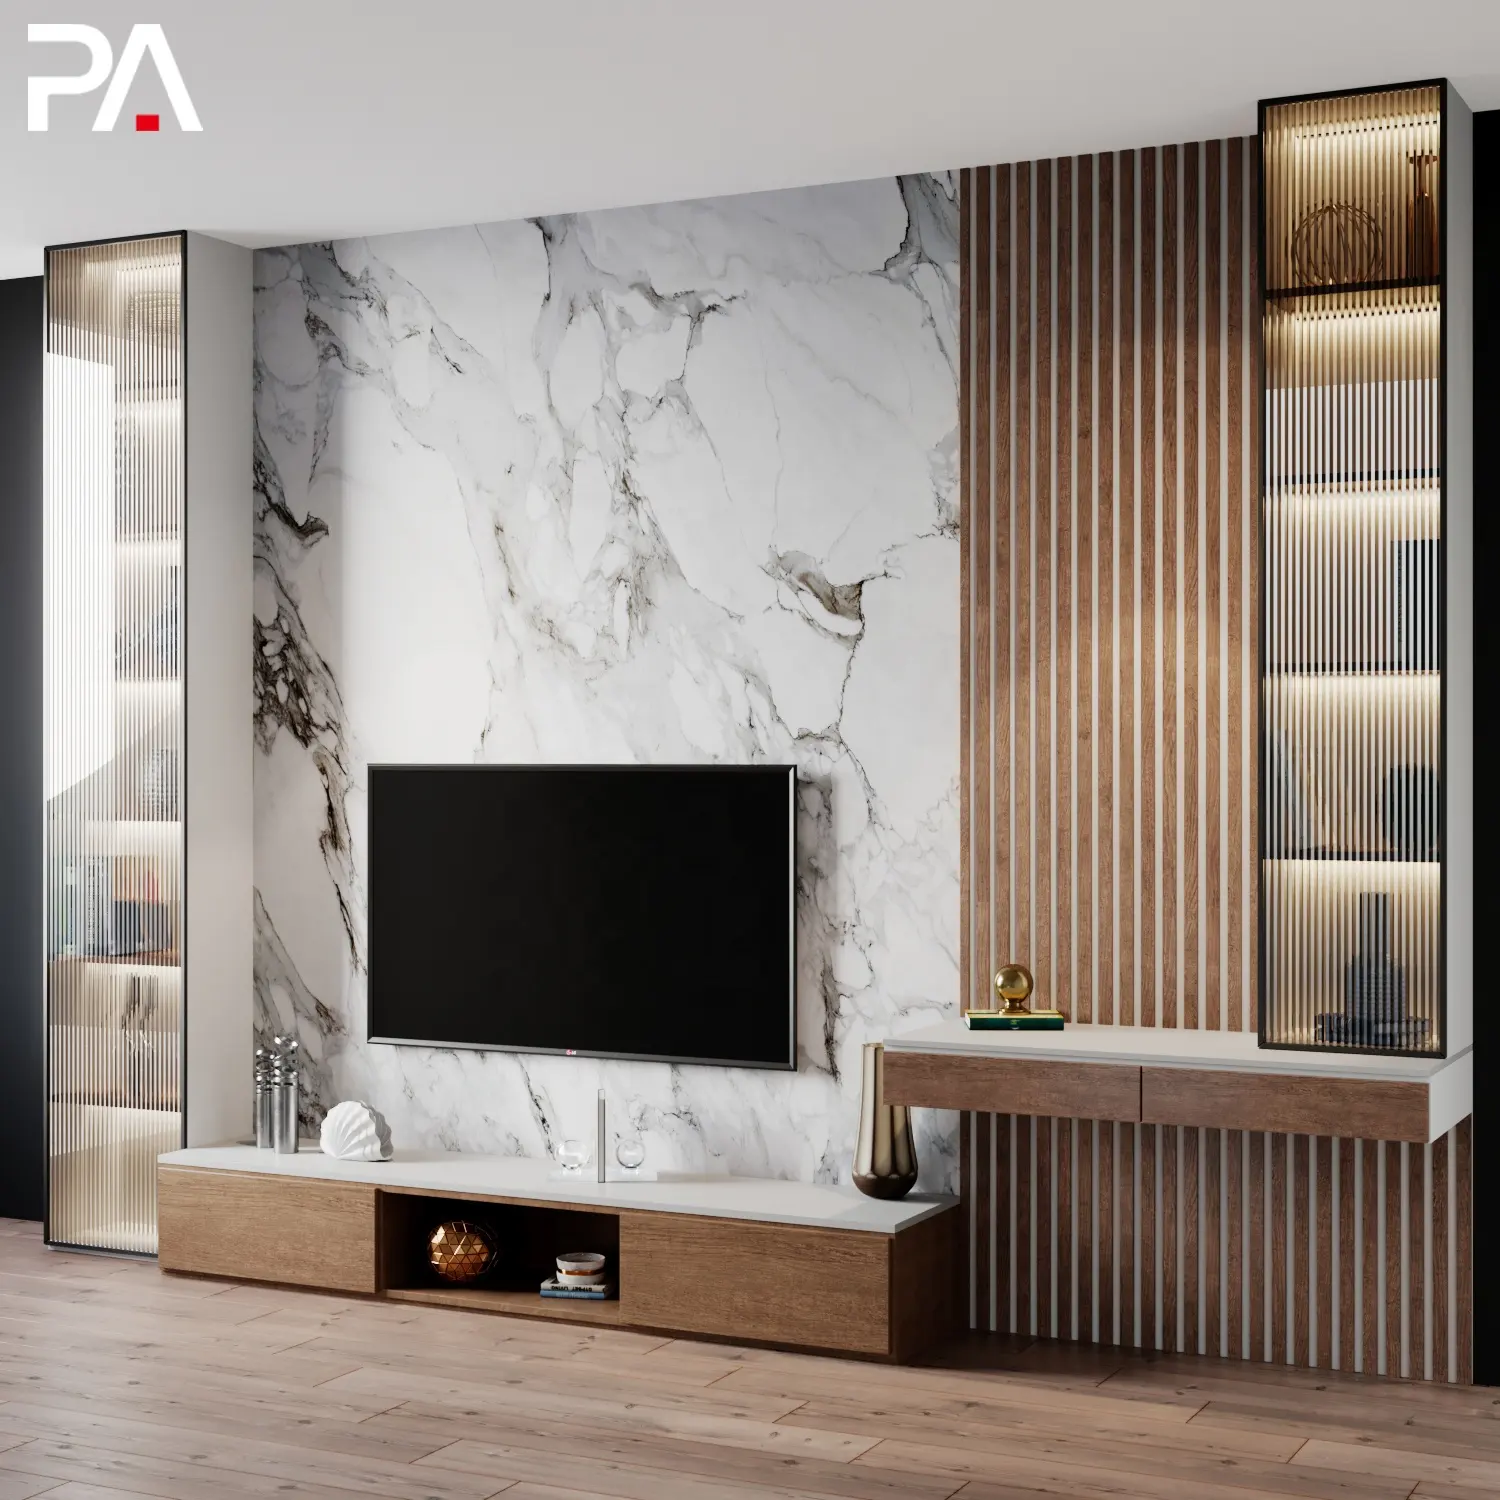 PA modern luxury complet moderne tv stand with console set for living room furniture tv table